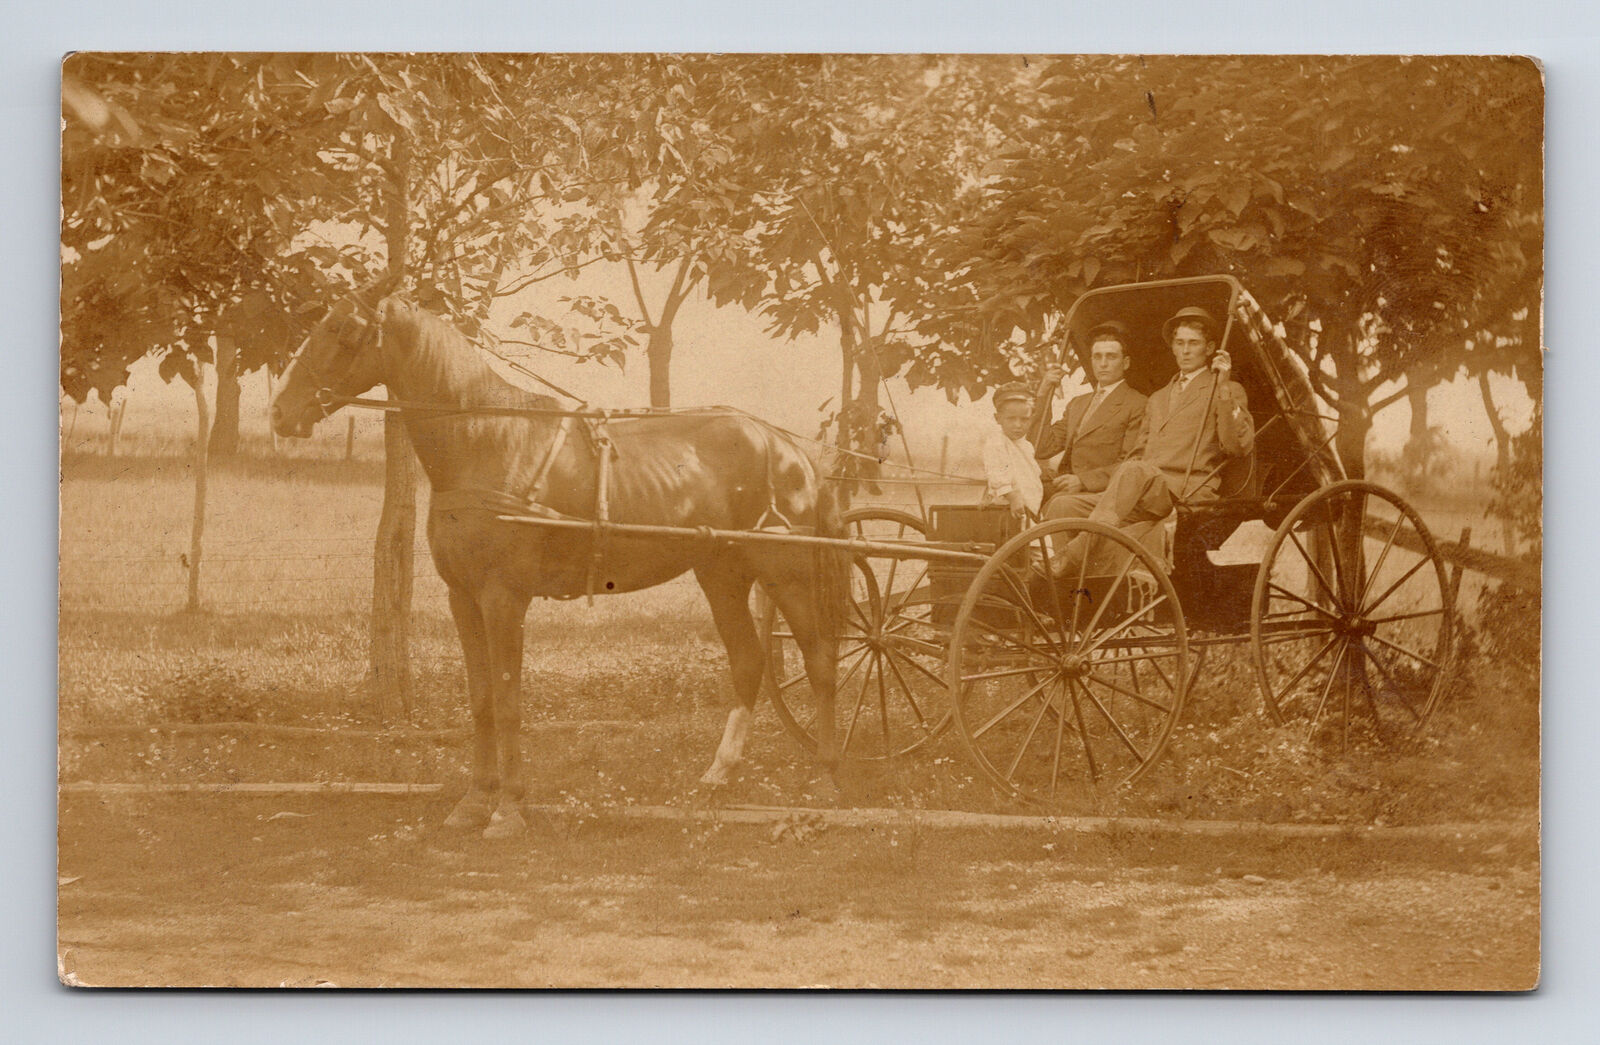 c1909 RPPC Two Men & Child in Horse Drawn Buggy Postcard Posted to Rochelle IL